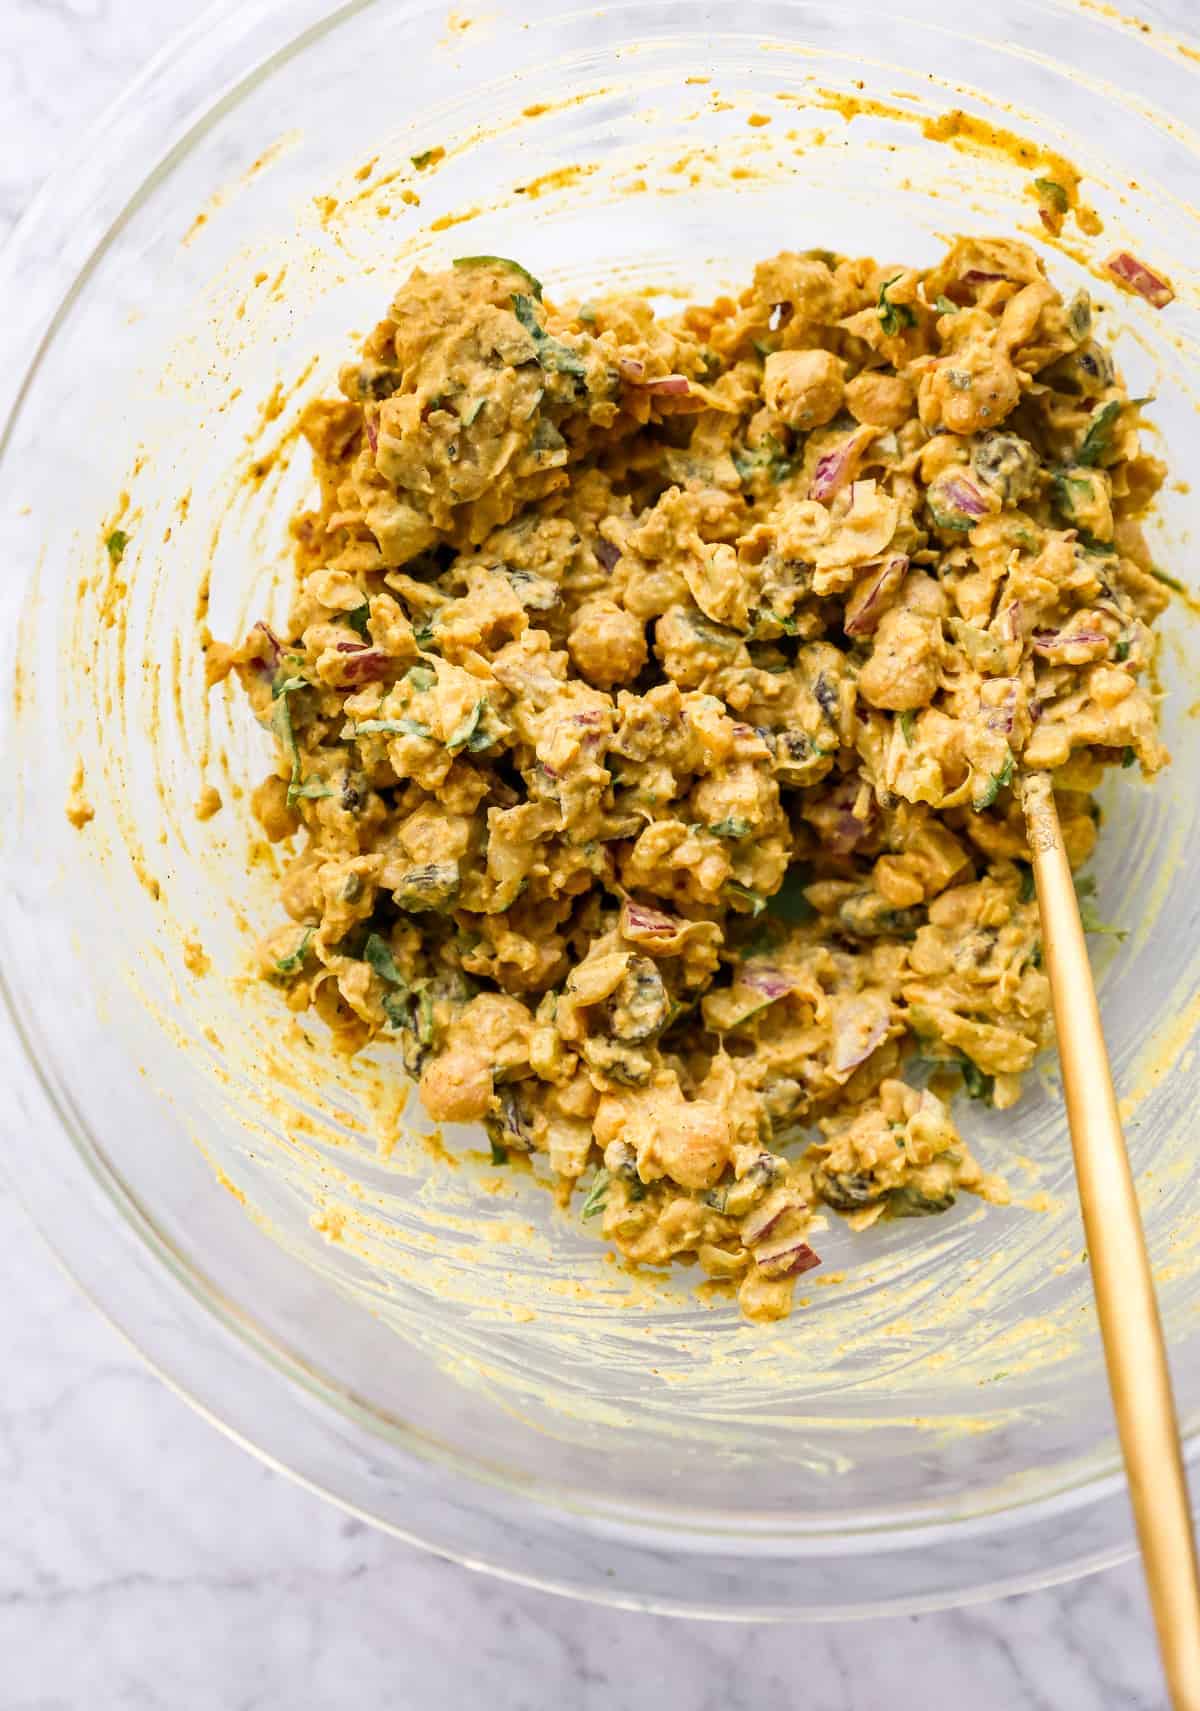 curried chickpea salad ingredients in a bowl